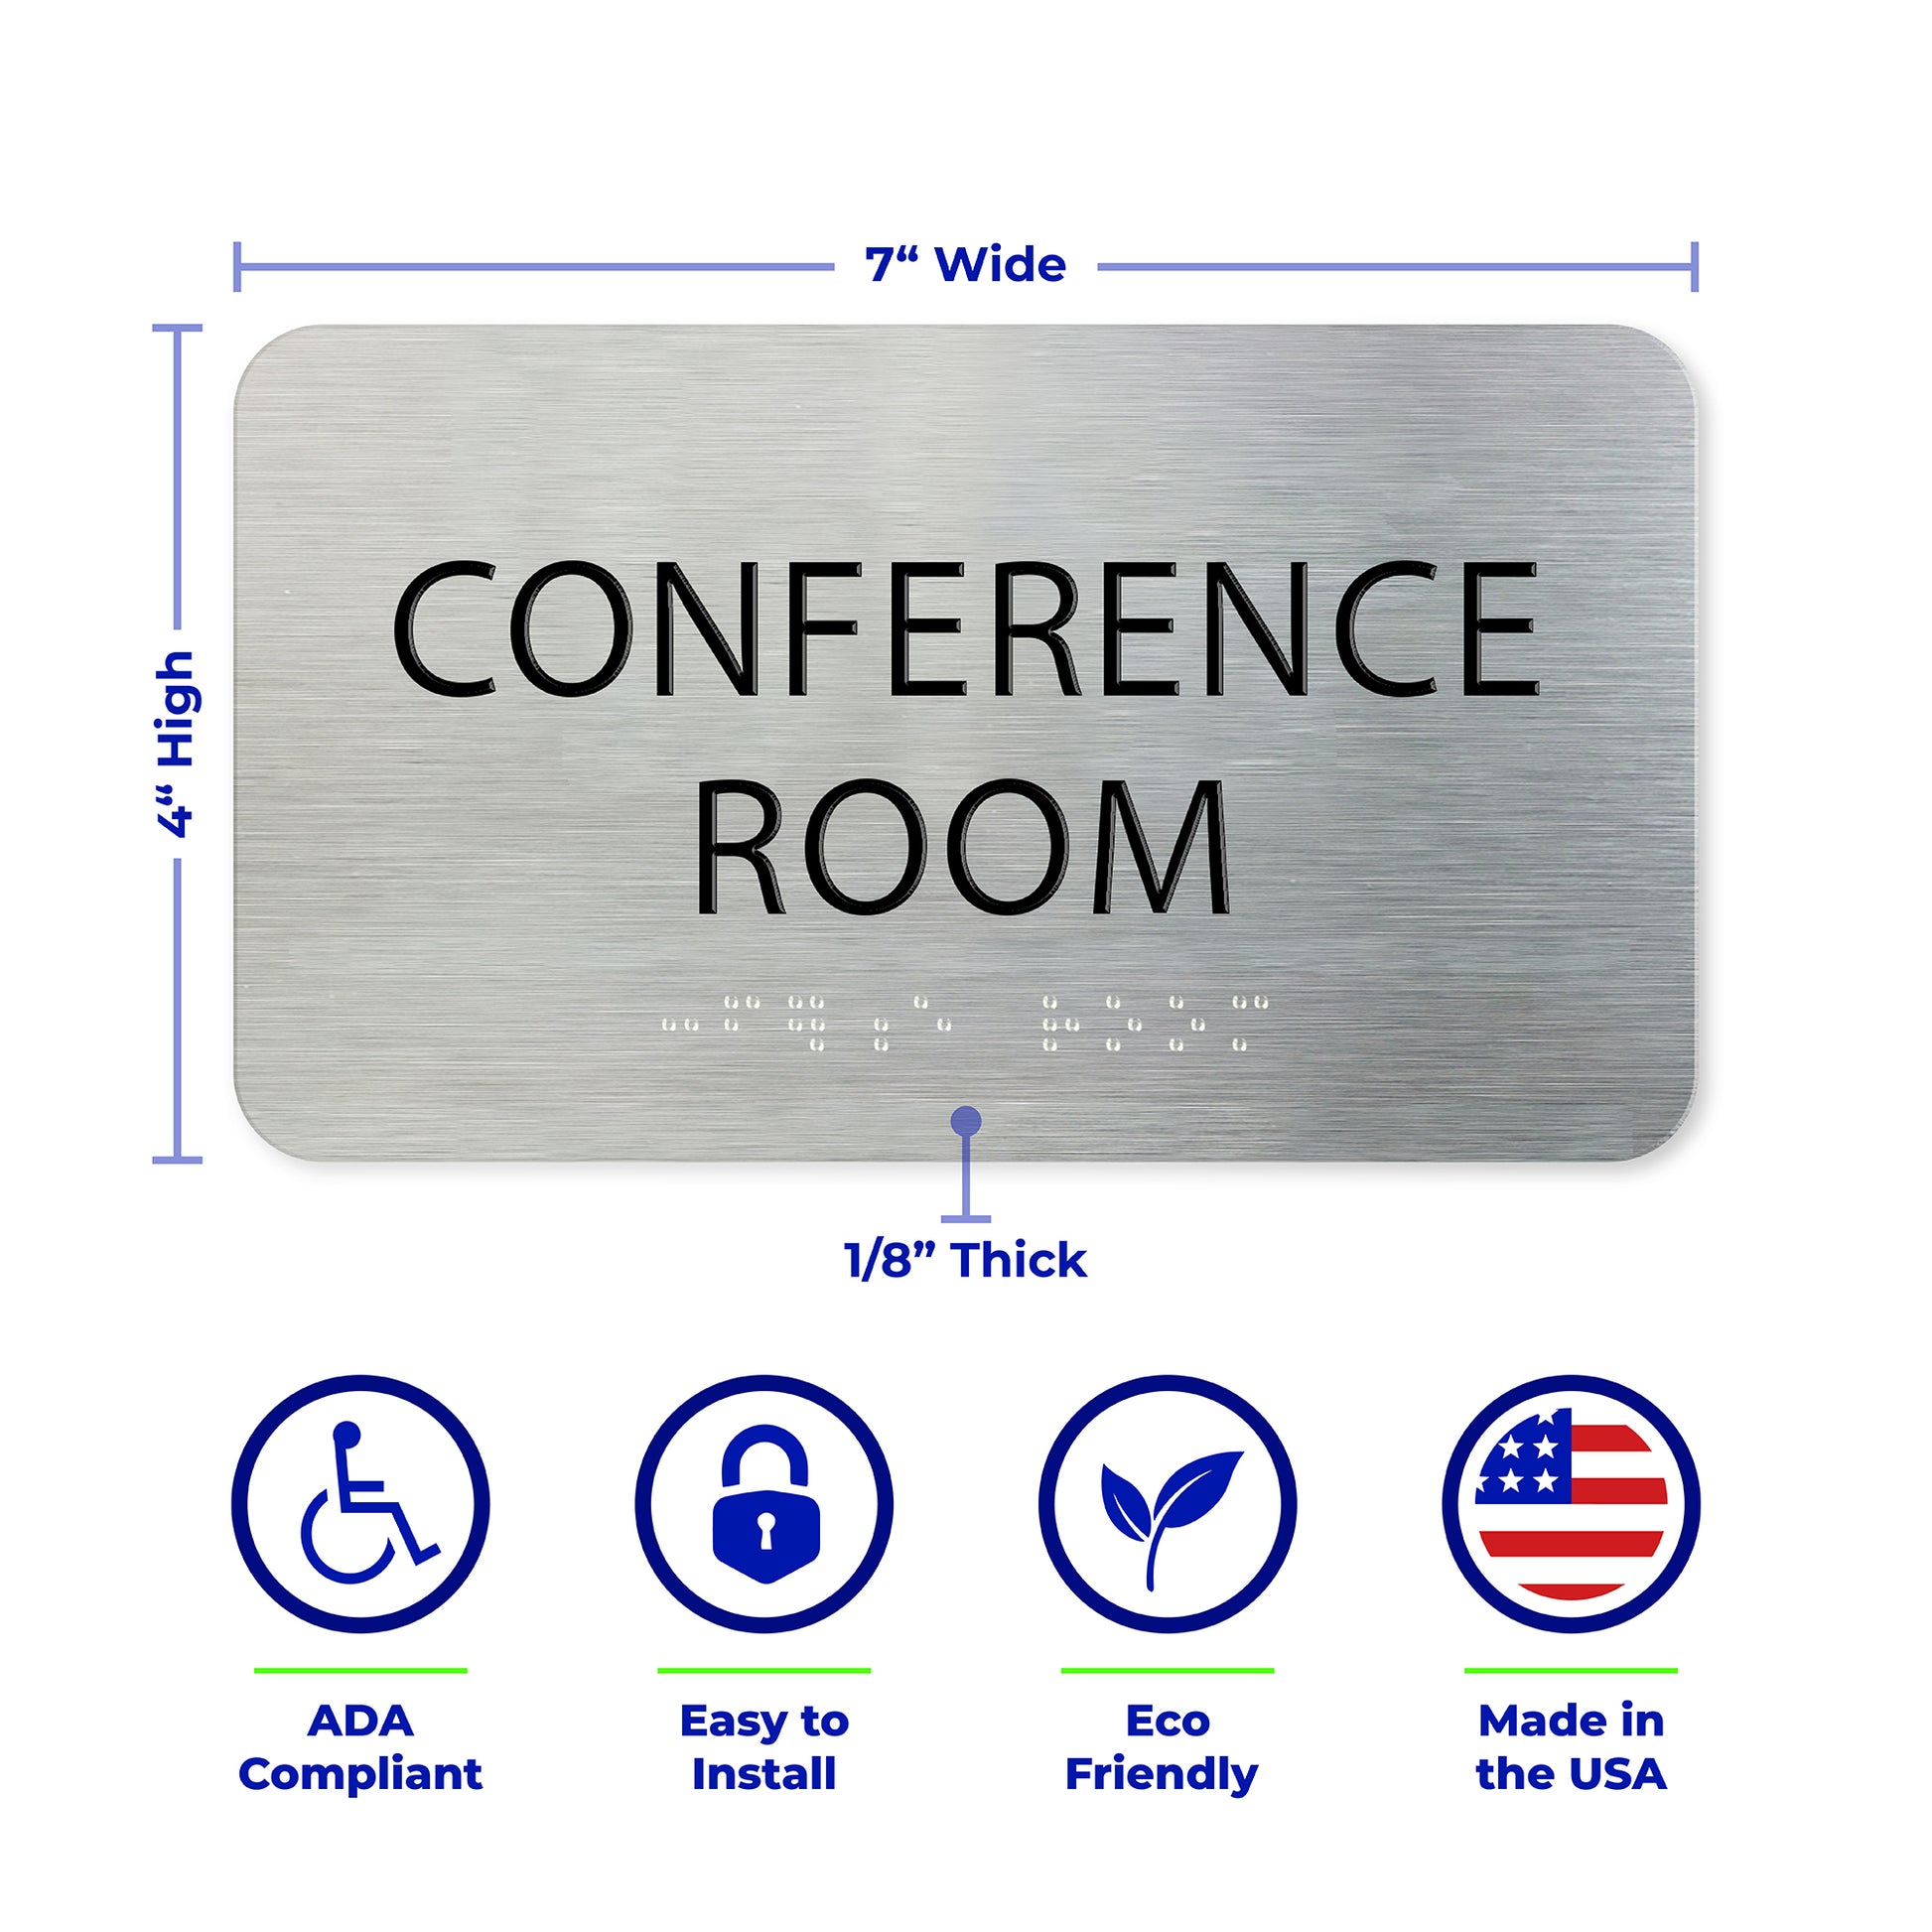 conference room signage